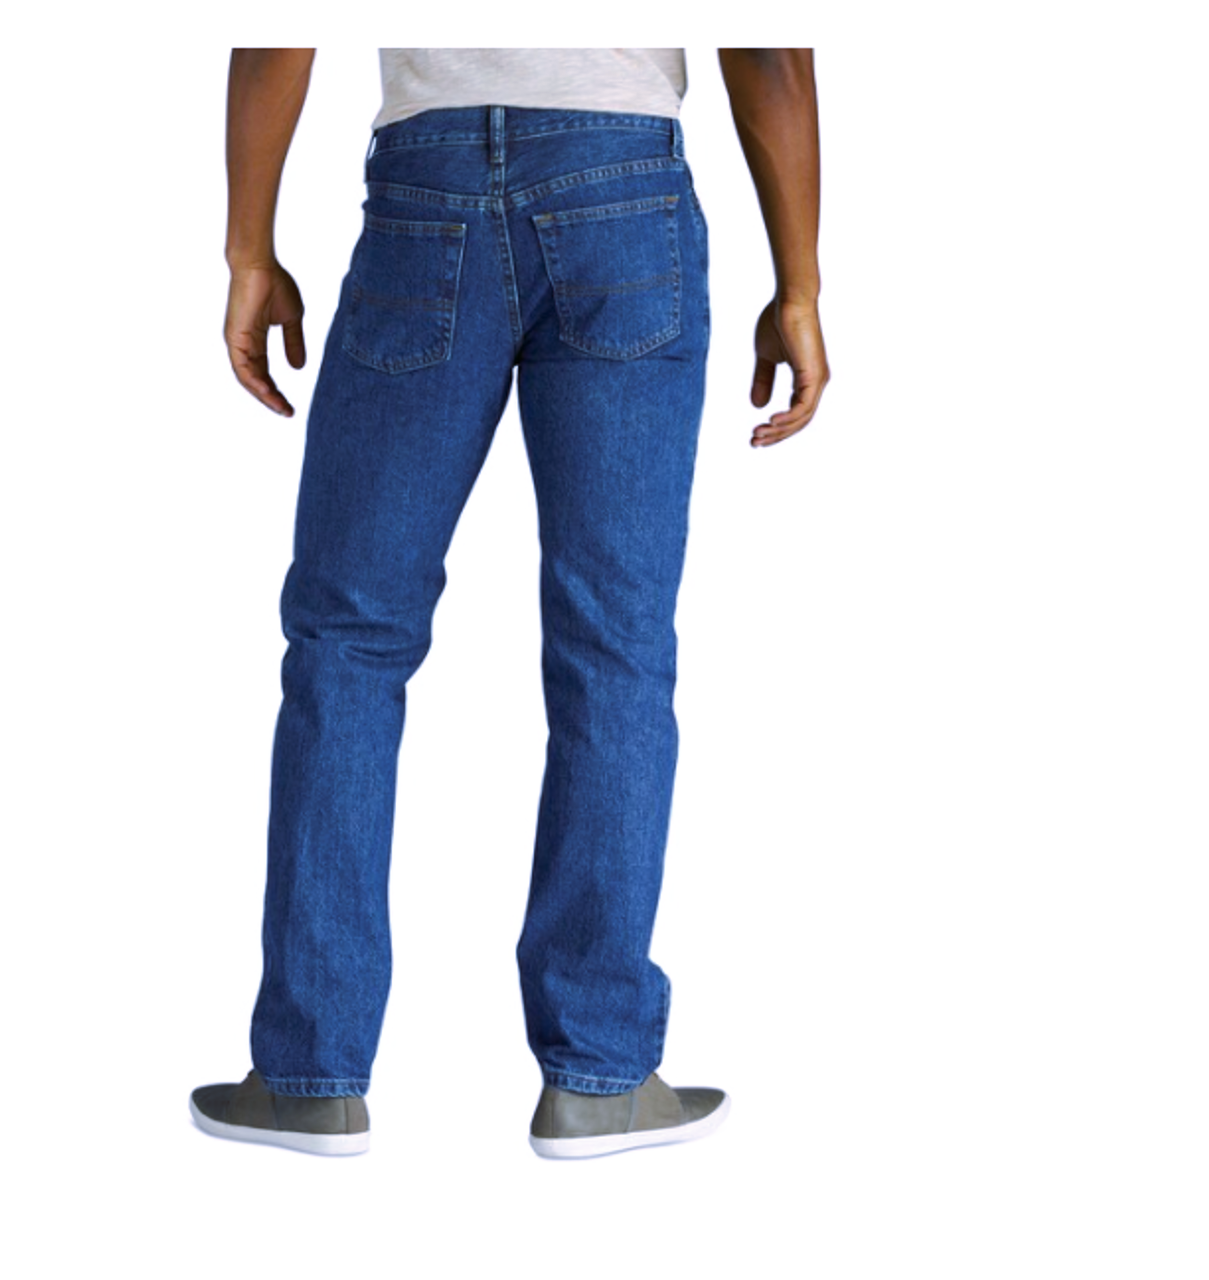 Men's Urban Pipeline™ Relaxed Bootcut Jeans